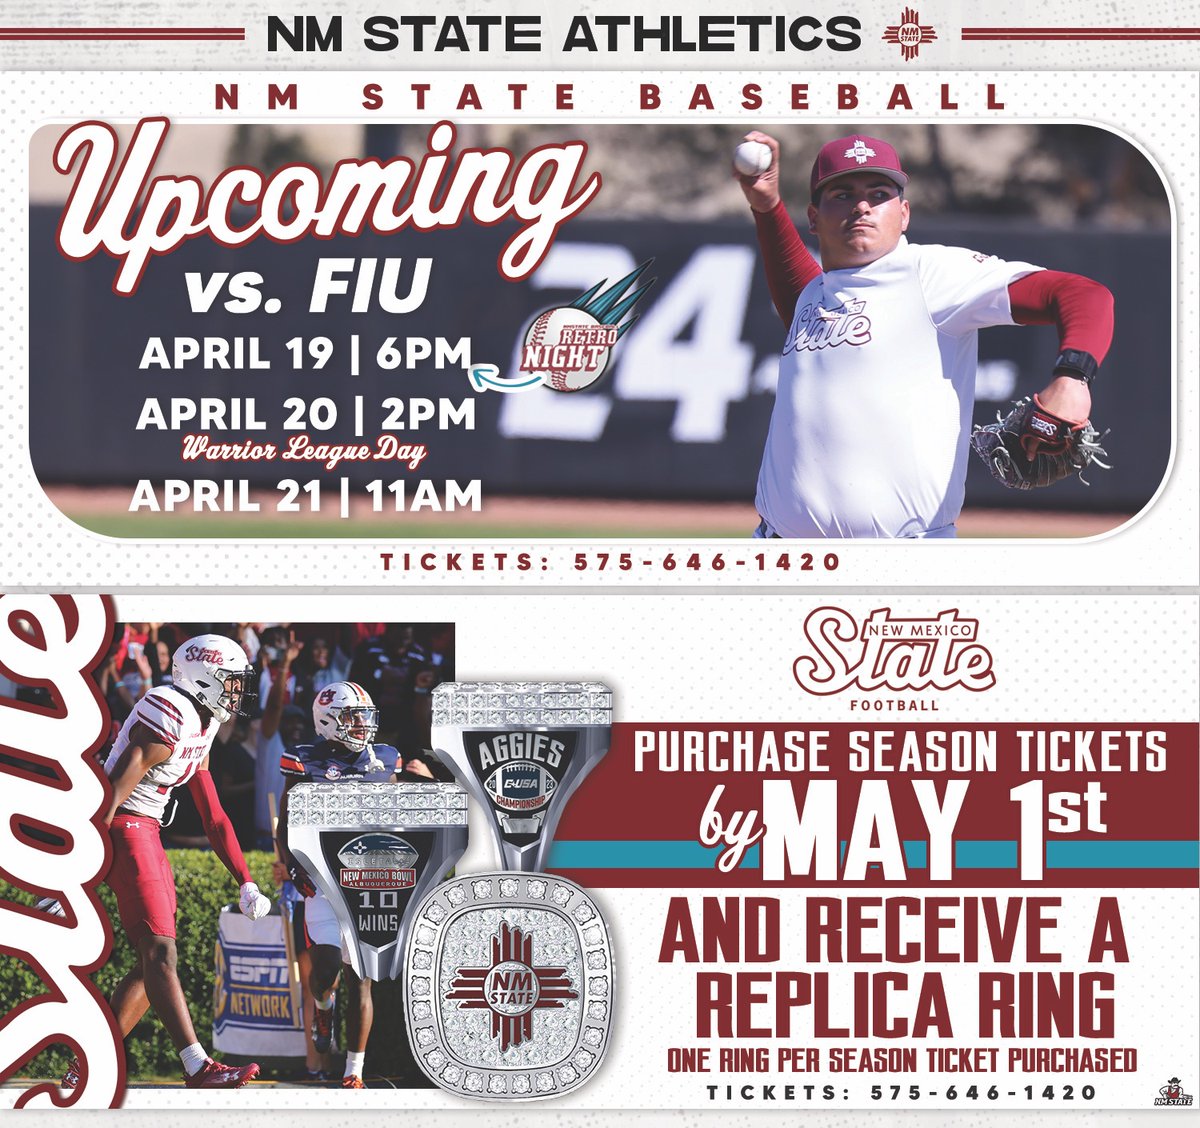 𝙷𝚊𝚕𝚏𝚠𝚊𝚢 𝚝𝚘 𝚝𝚑𝚎 𝚠𝚎𝚎𝚔𝚎𝚗𝚍 🔜 Big home series for @NMStateBaseball as they host @ConferenceUSA opponent FIU ⚾️ And don't forget to secure your @NMStateFootball season tickets early 🏈 #AggieUp | #NoLimitsOnUs